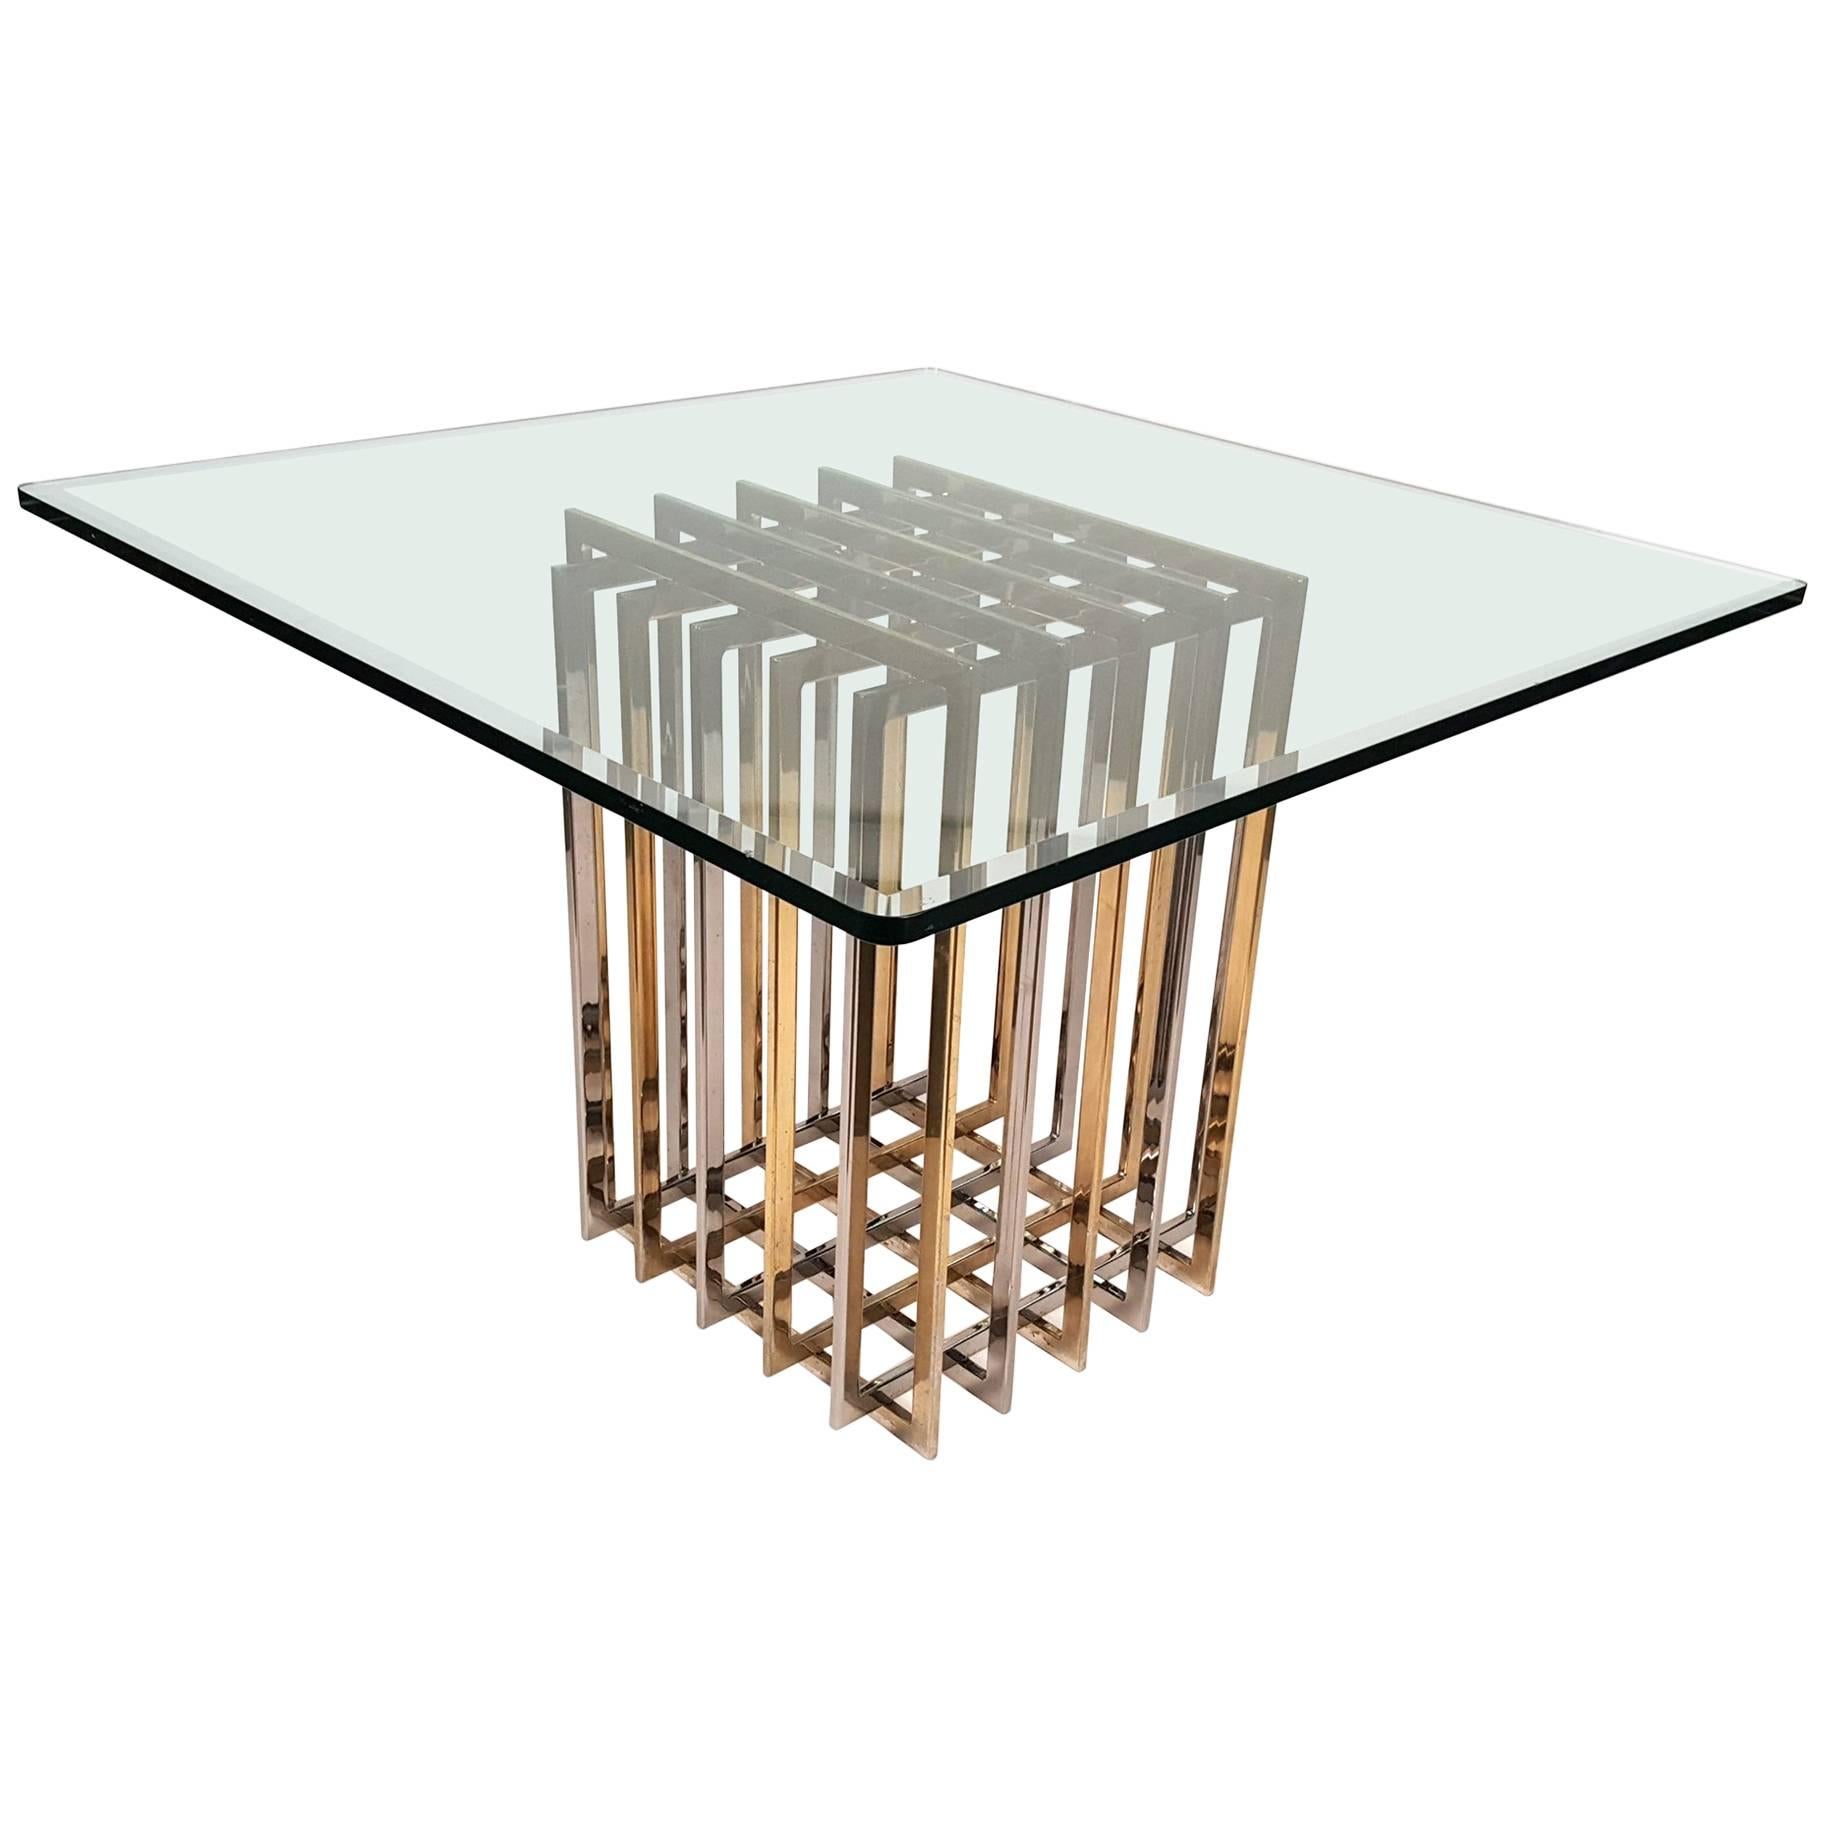 Pierre Cardin Mixed Metals Table for Dining, Game or Entry